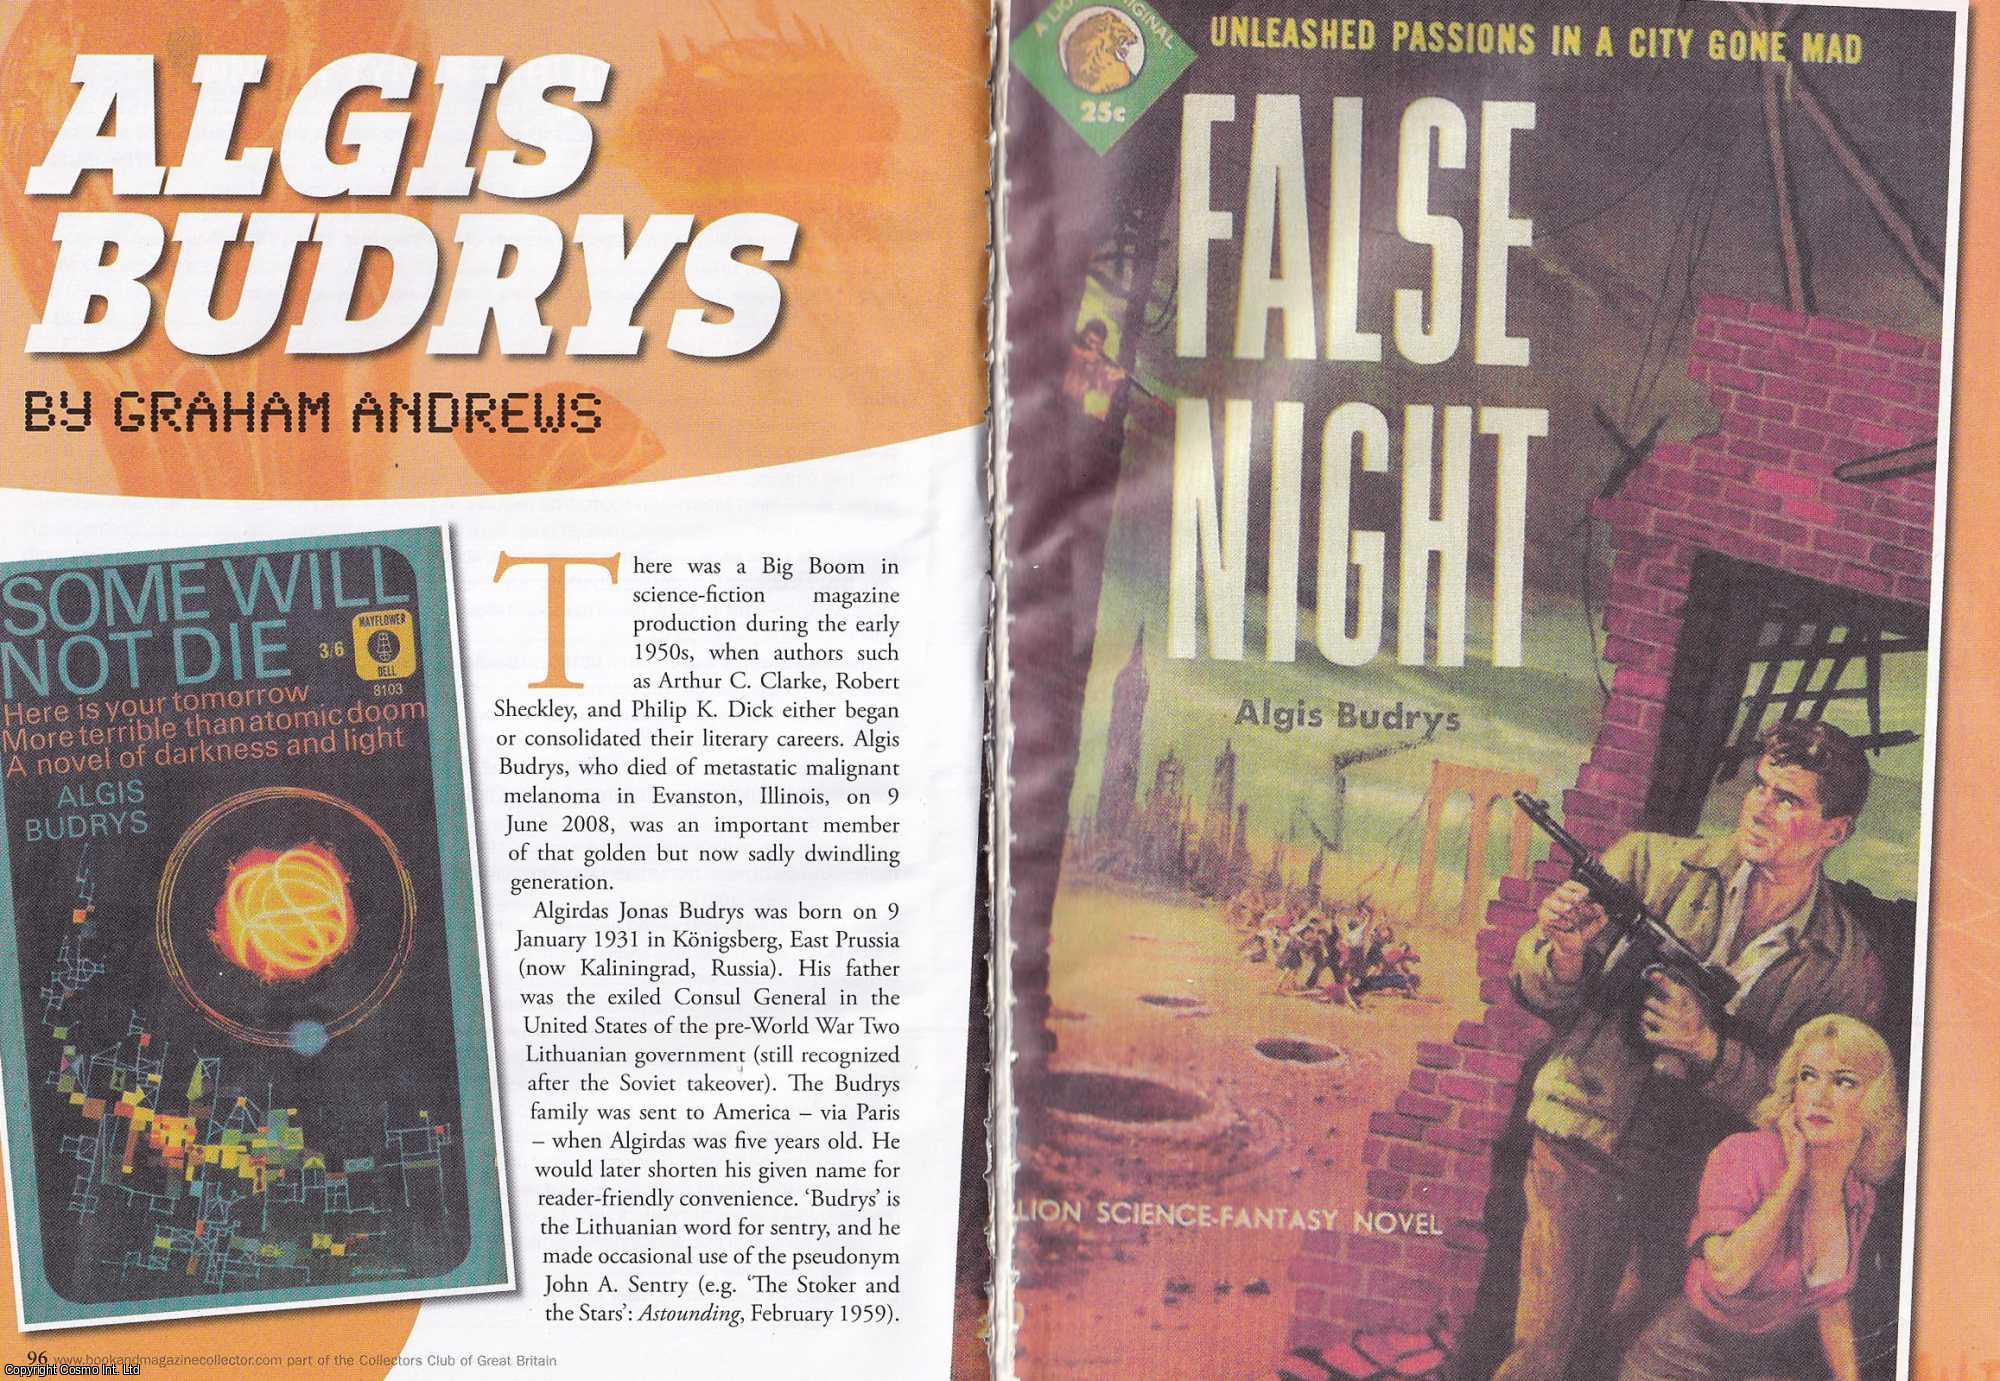 Graham Andrews - Algis Budrys. This is an original article separated from an issue of The Book & Magazine Collector publication.